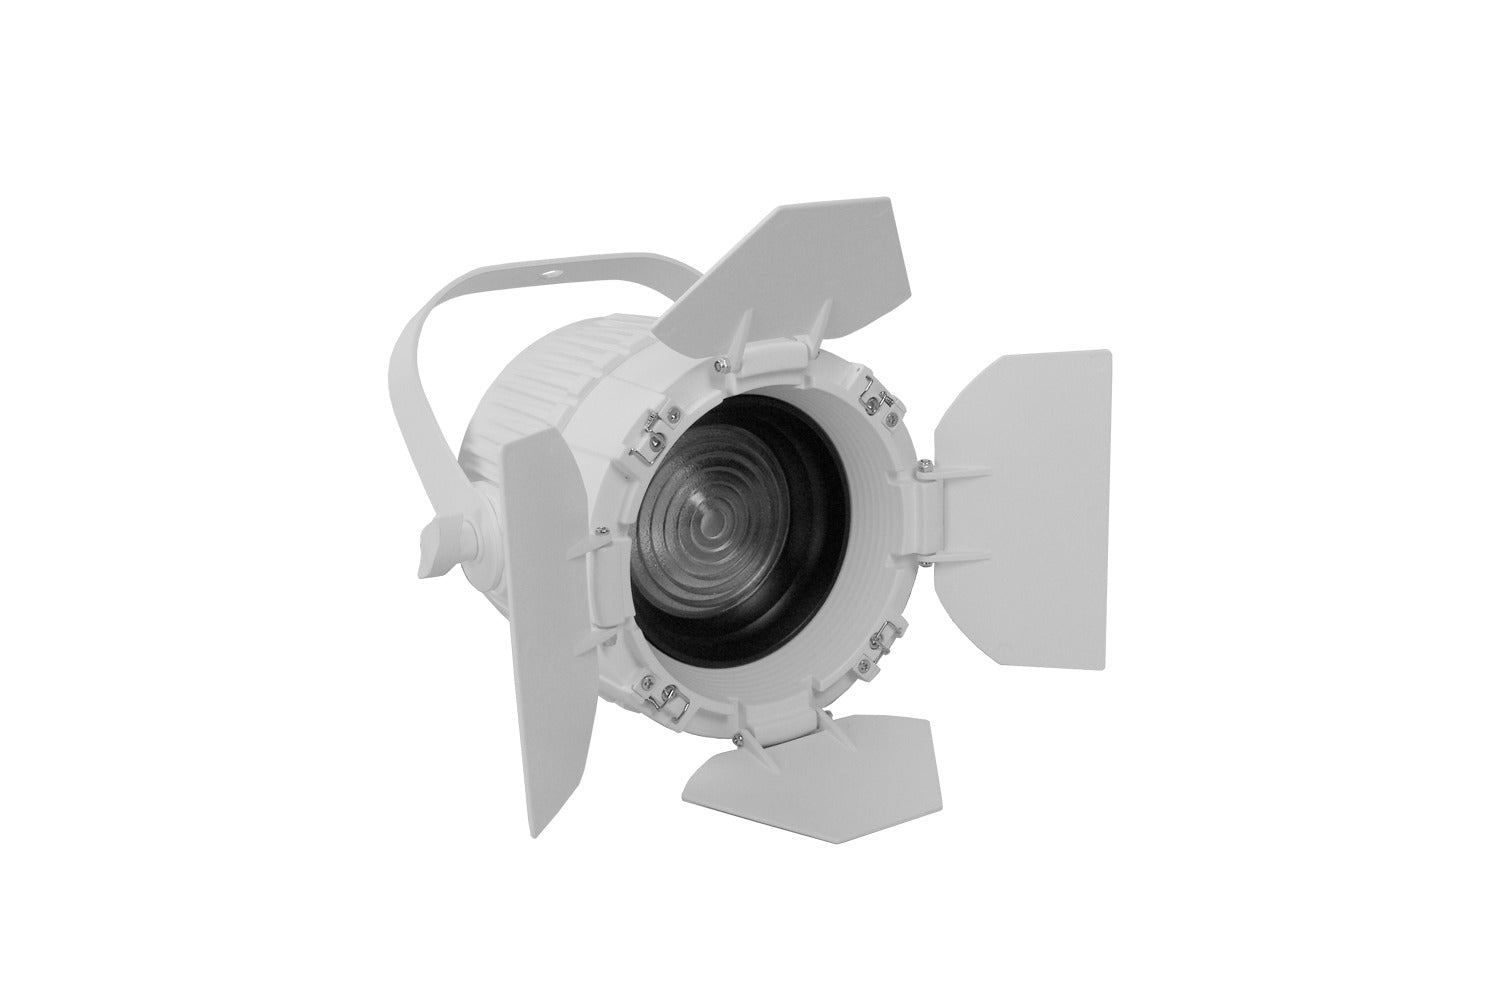 F96VW-WH - Variable White Fresnel with Manual Zoom (White)